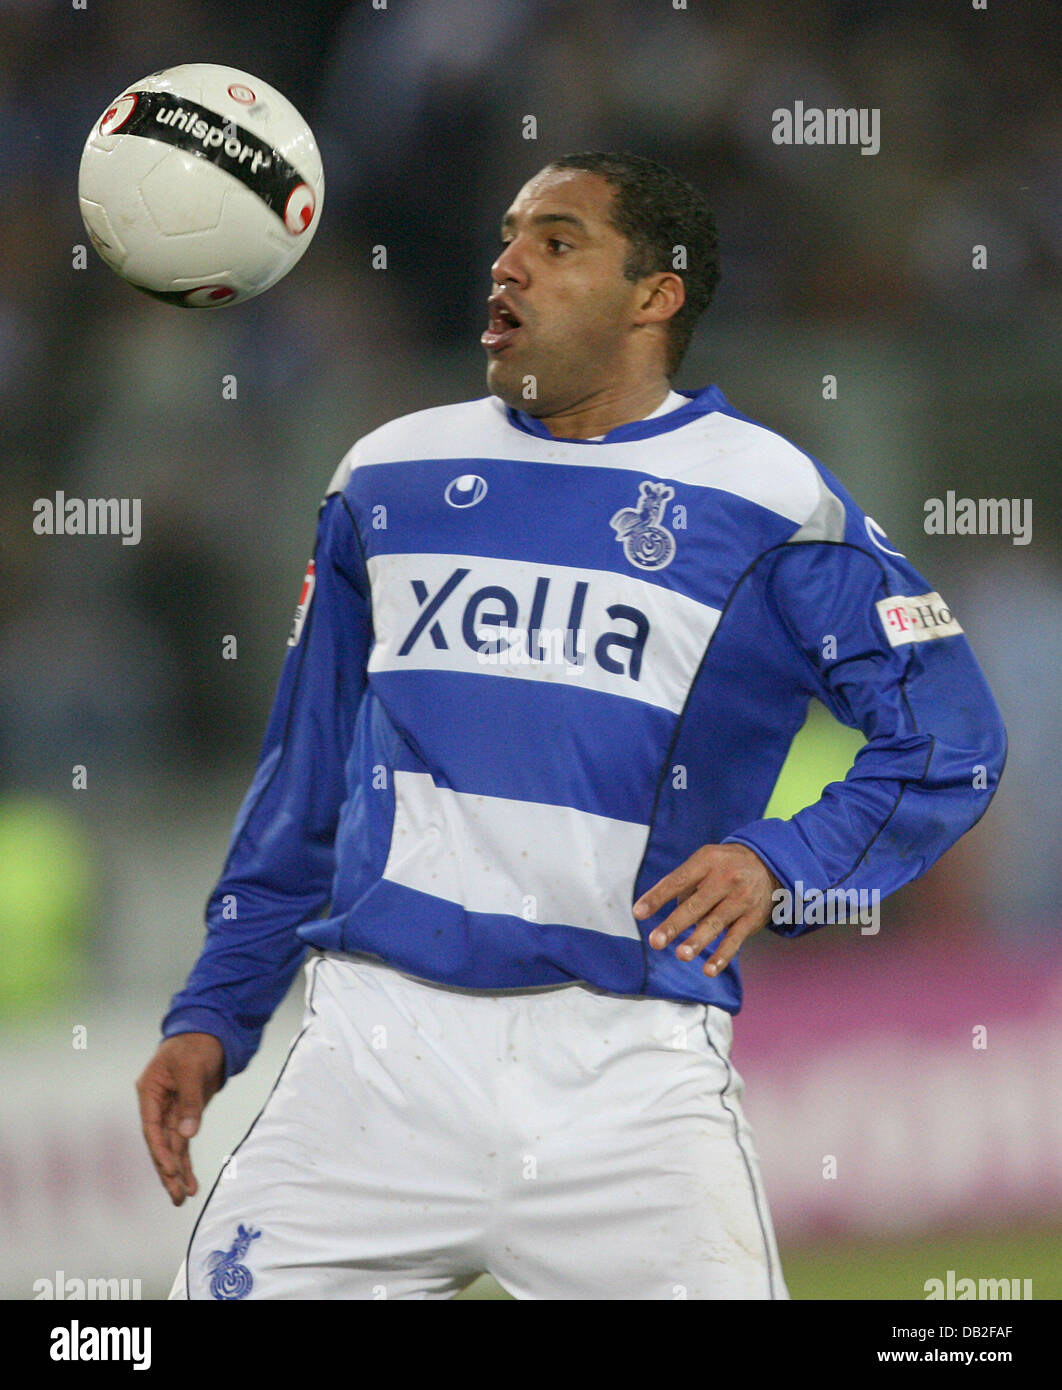 Ailton of Duisburg stops the ball during the Bundesliga match MSV Duisburg v 1.FC Nuremberg at MSV Arena stadium of Duisburg, Germany, 02 December 2007. Diosburg won the match 1-0. Photo: Roland Weihrauch Stock Photo